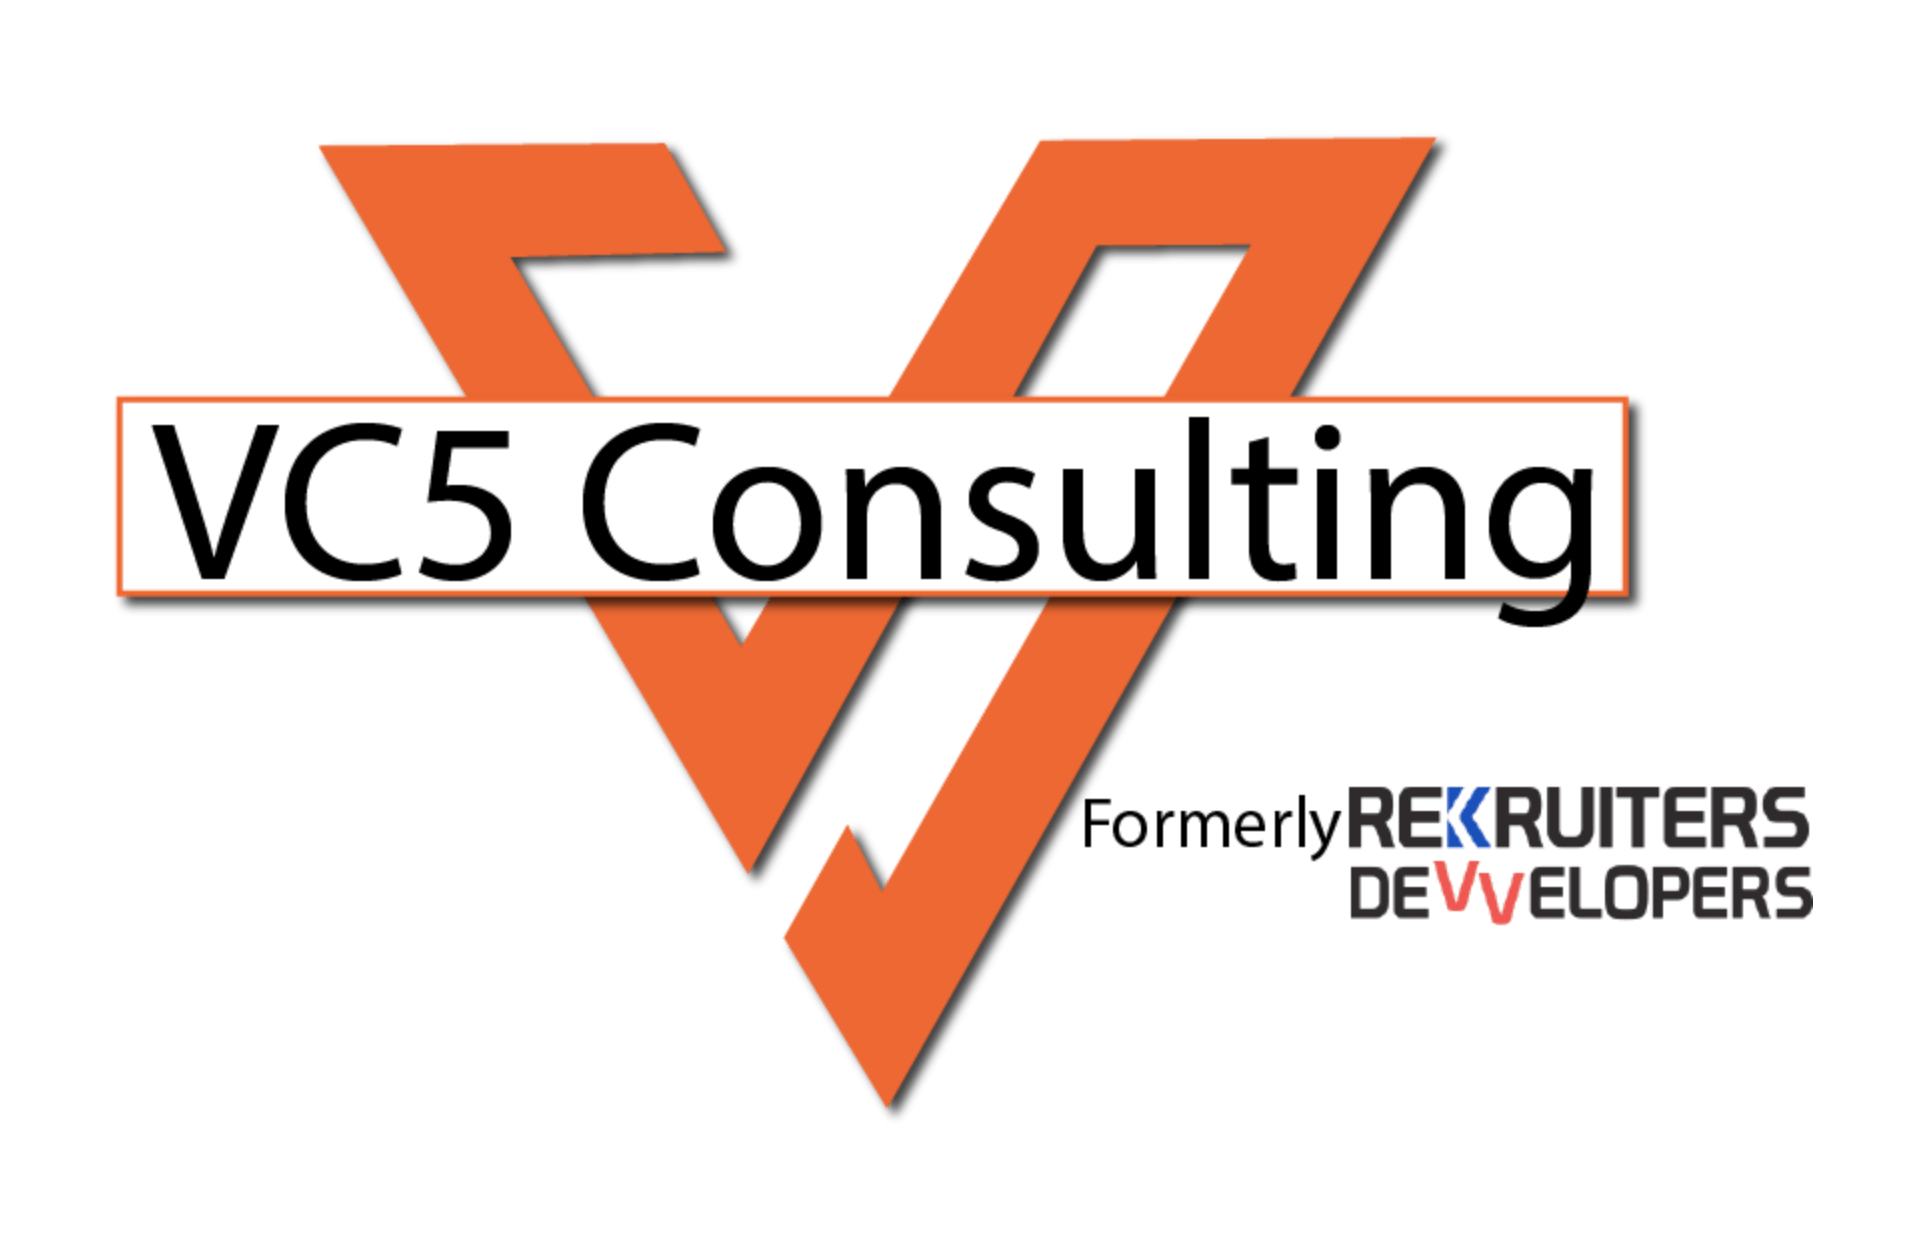 Rekruiters is now VC5 Consulting